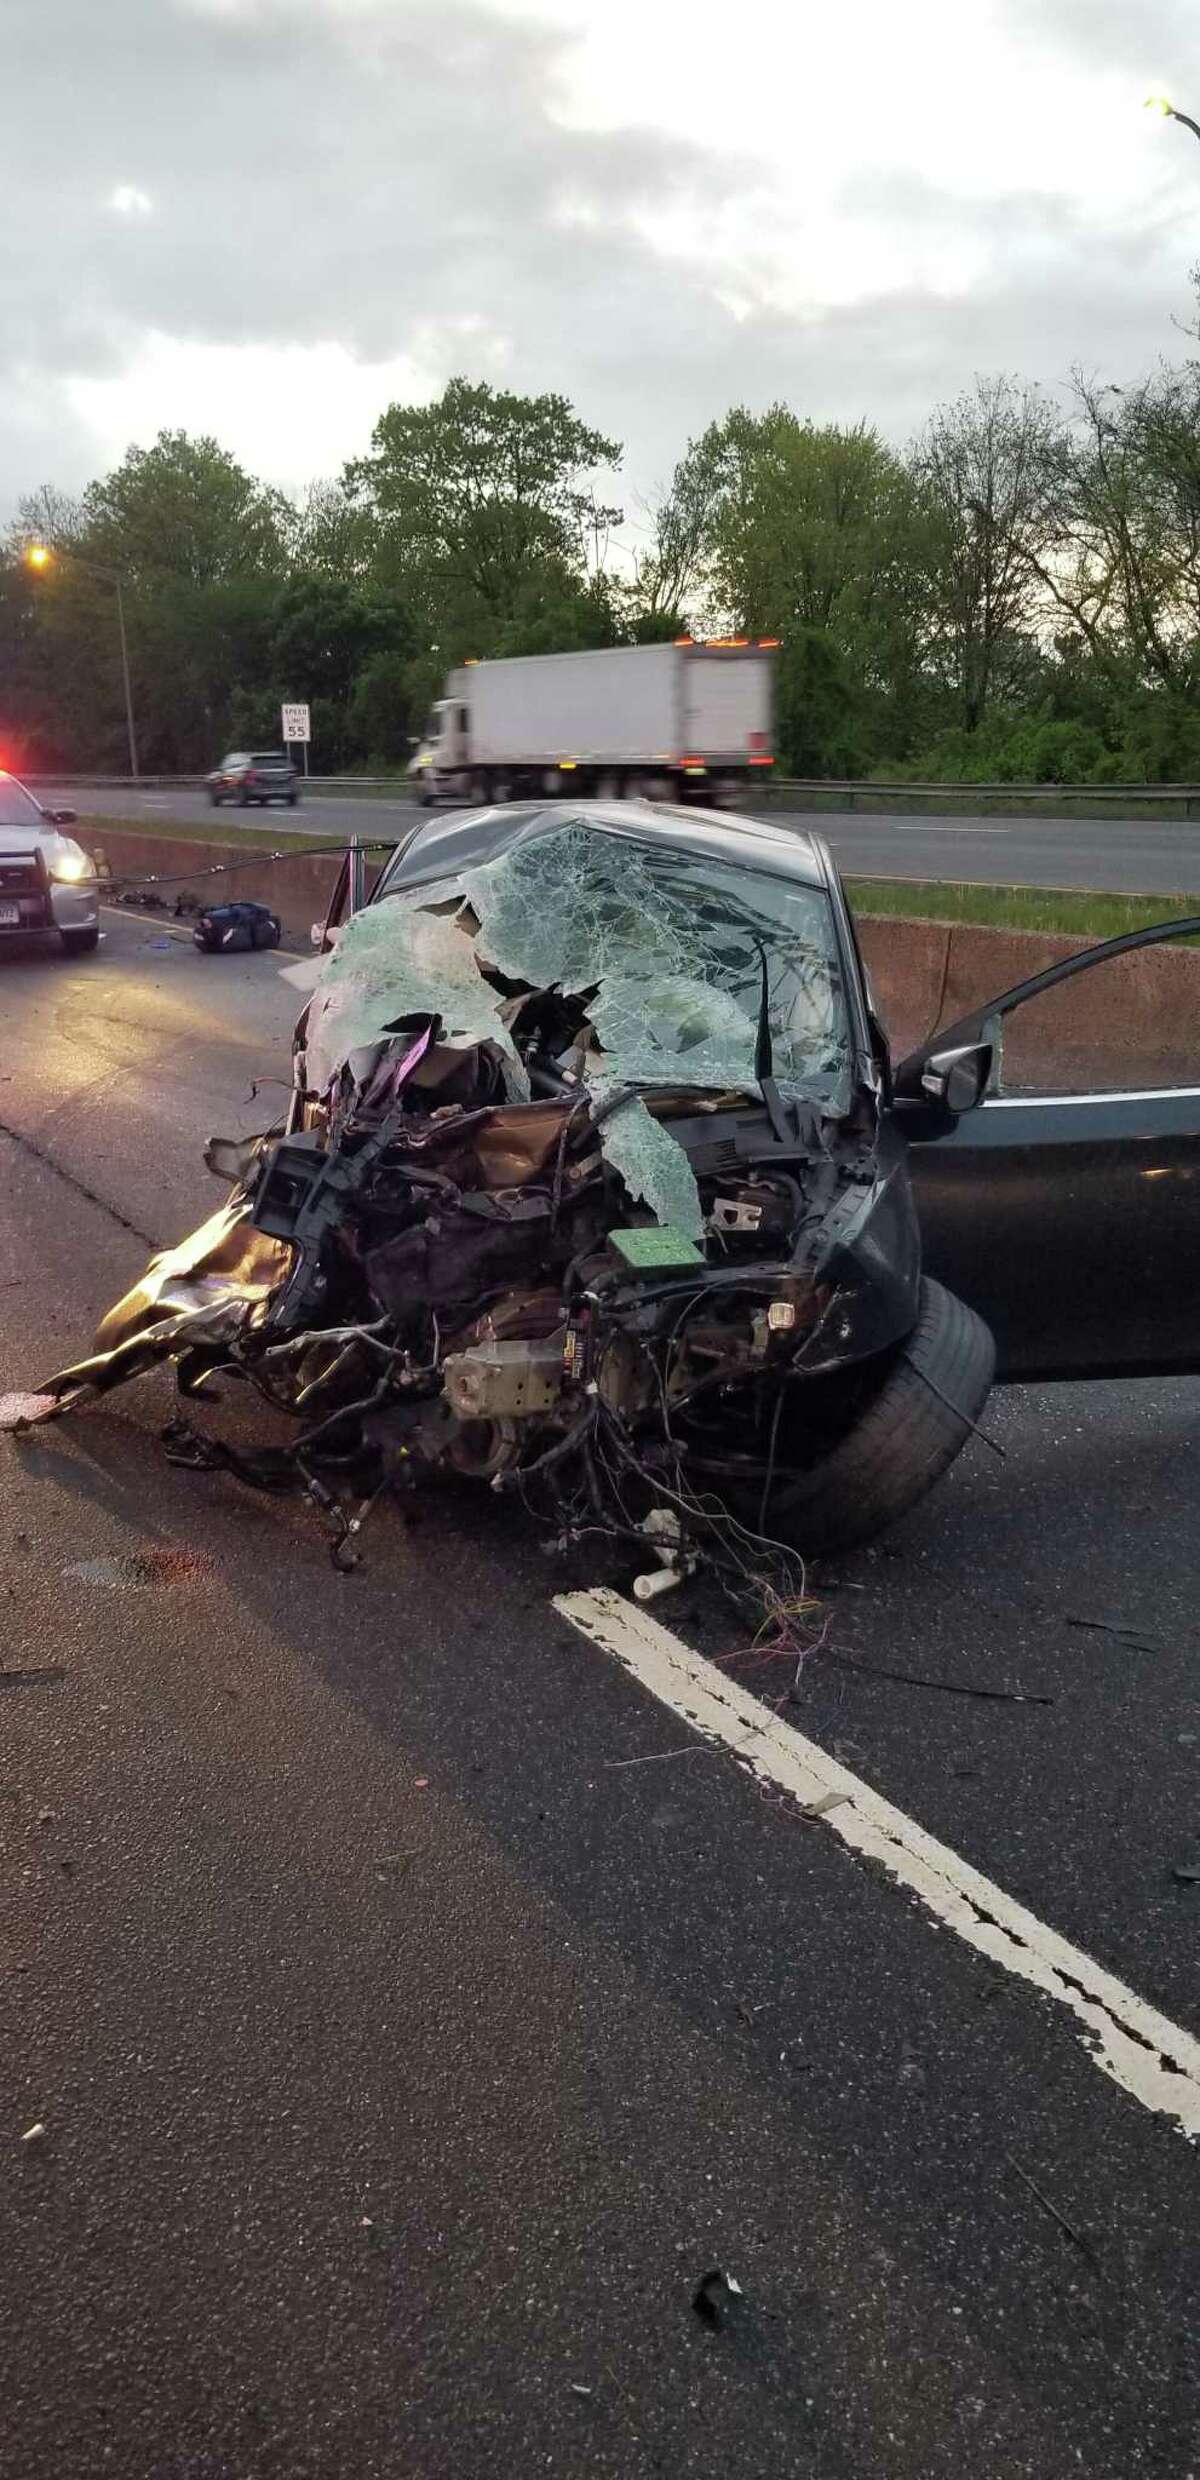 Five people were hospitalized after a crash on I-95 early Saturday morning, according to Westport firefighters.